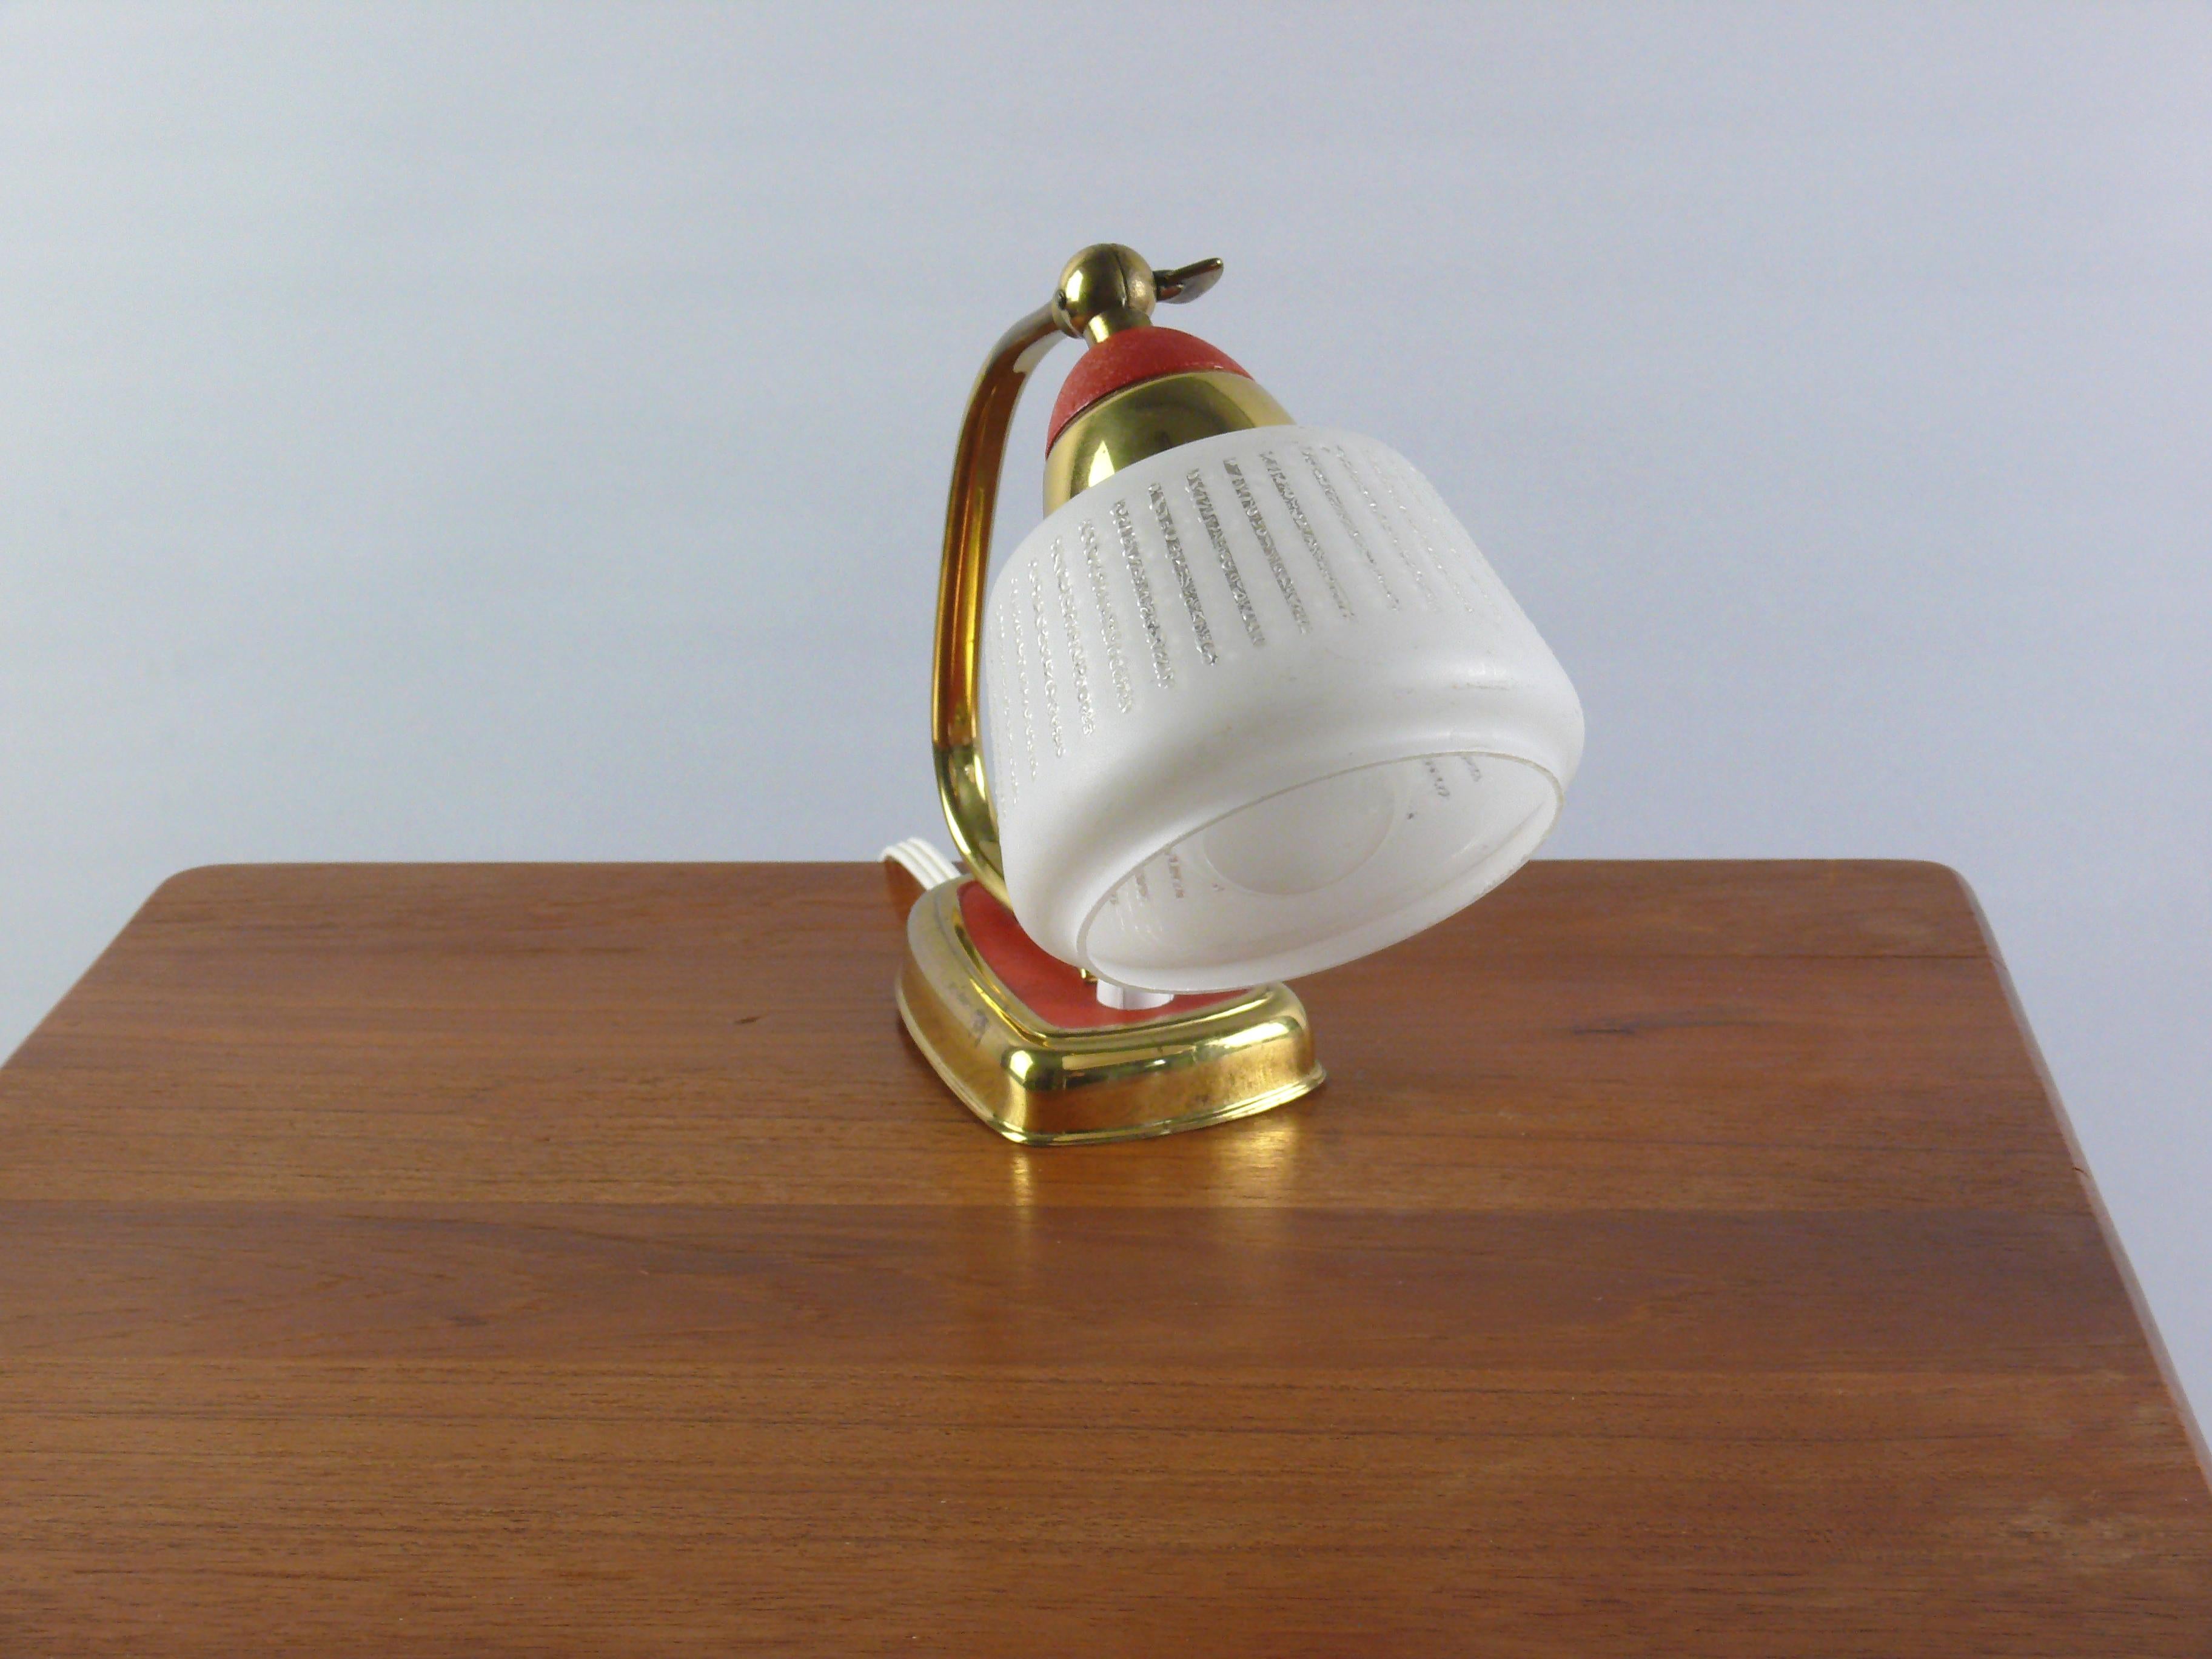 Lovely little table lamp from the 1960s. Textured opal glass shade with shrink varnish glass holder and base, brass arm and brass base surround. Rounded, trapezoidal brass base with pressure switch. The shade can be adjusted via a joint with a